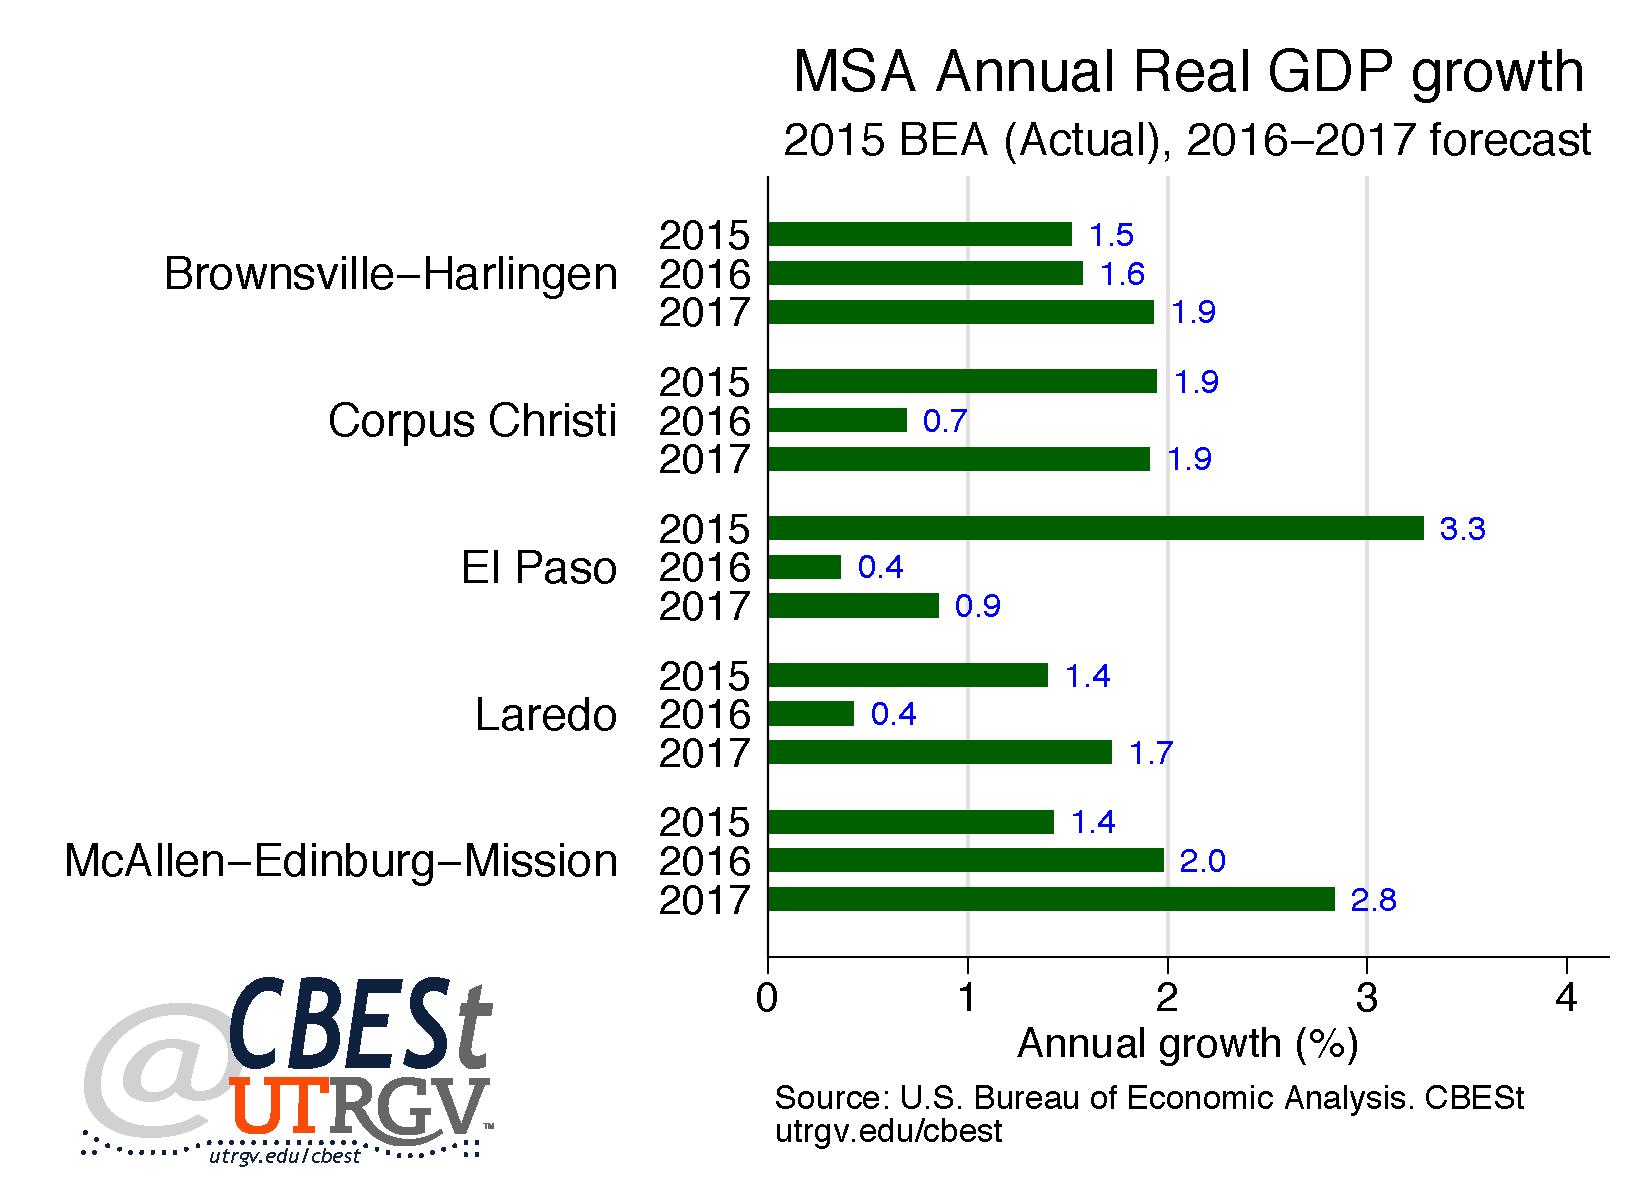 Real GDP growth forecast